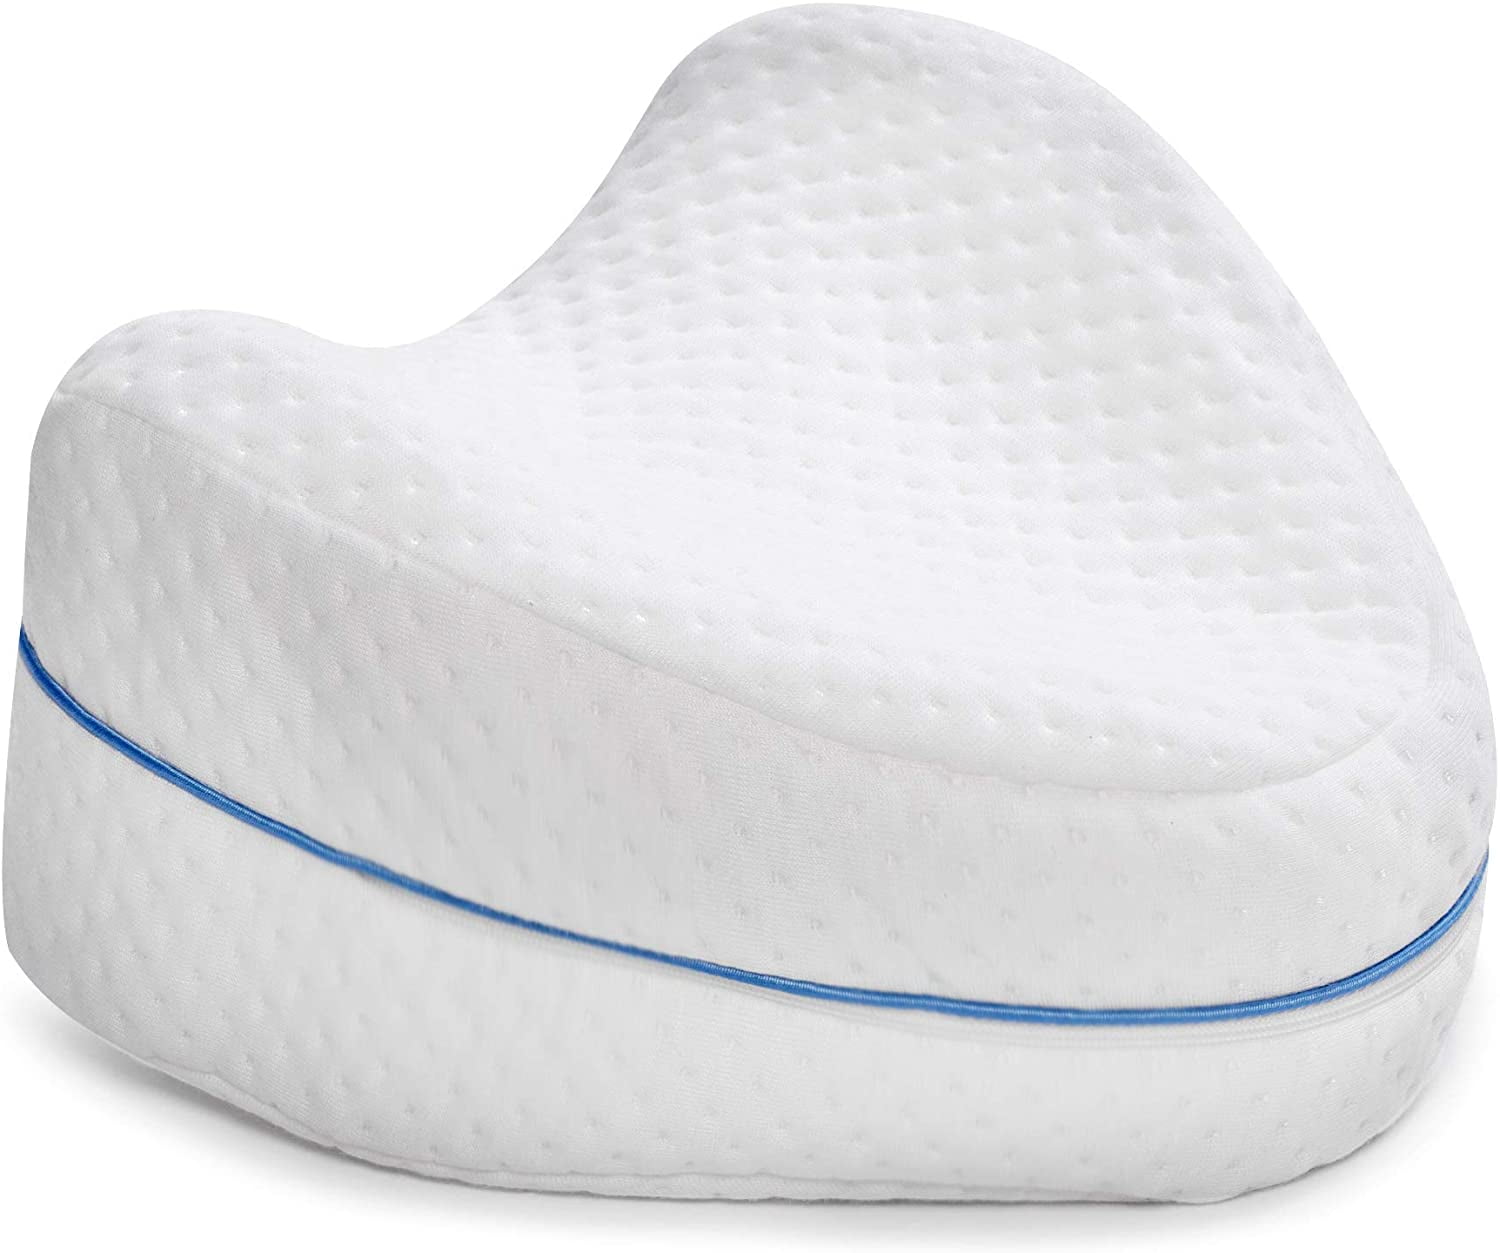 and Knee Pain- Leg Pillow Memory Foam Wedge Contour Leg Pillow with Washable Cover Support & Comfort Breathable White Best for Lower Leg Sleep Contour Wedge Back Knee Pillow 